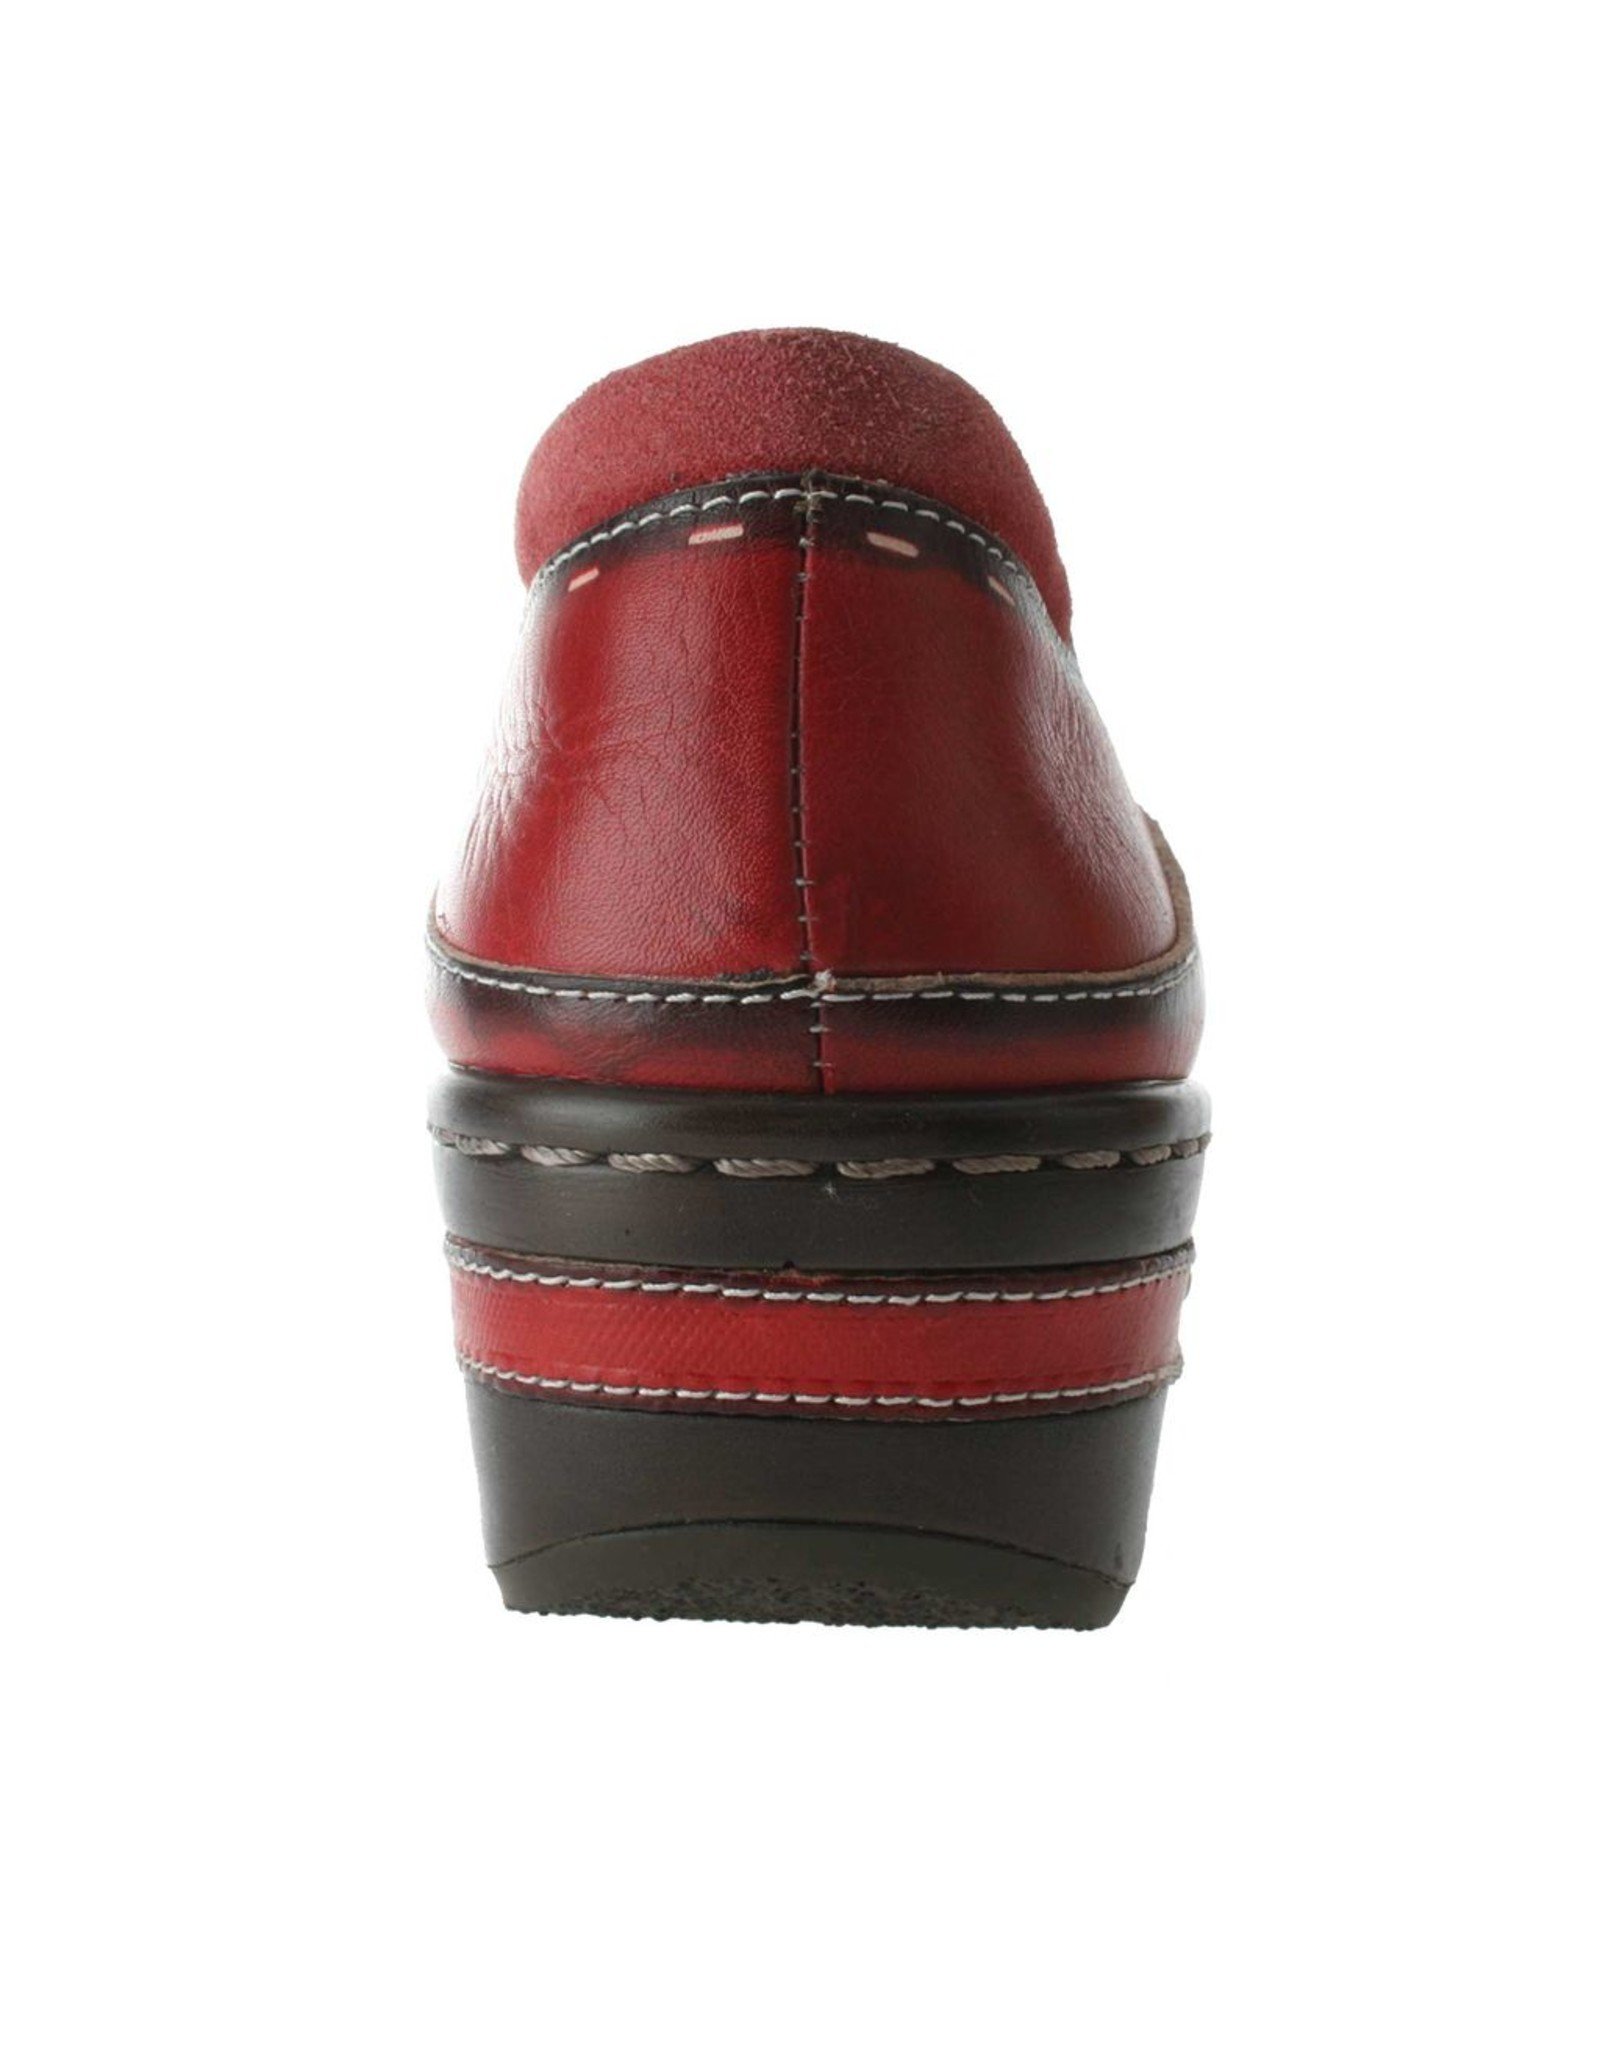 Burbank Red Leather Clog